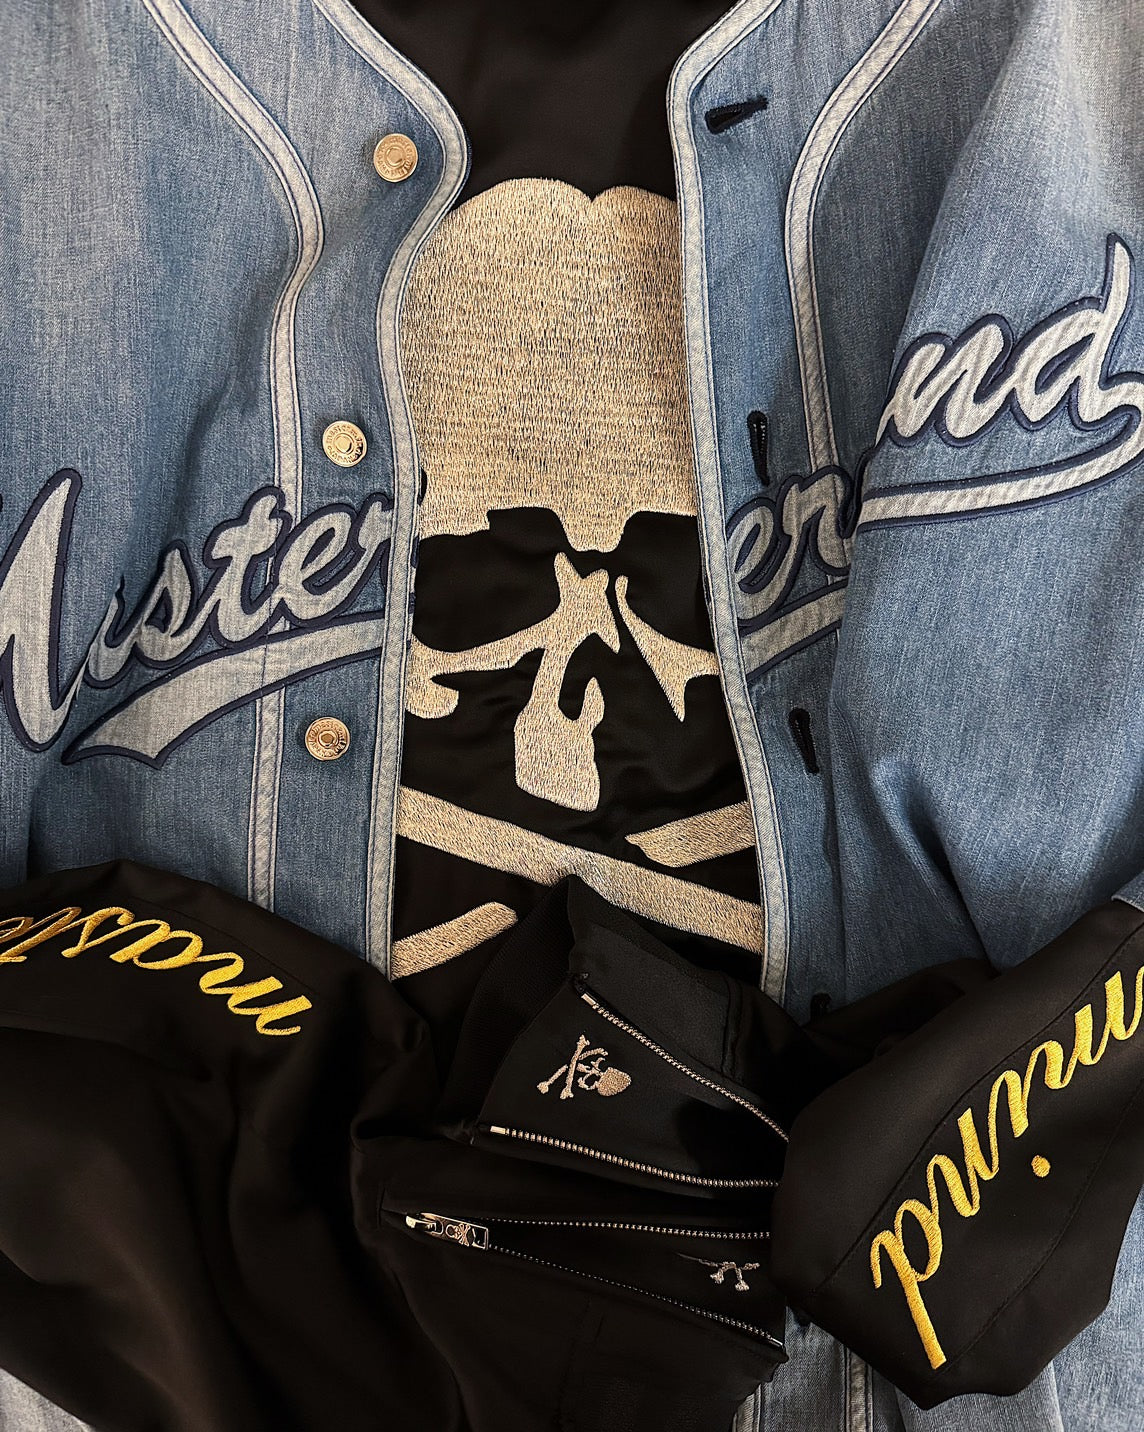 【MASTERMIND】<br> The second edition of the 24SS collection will be on sale from 10am on Saturday, March 2nd!